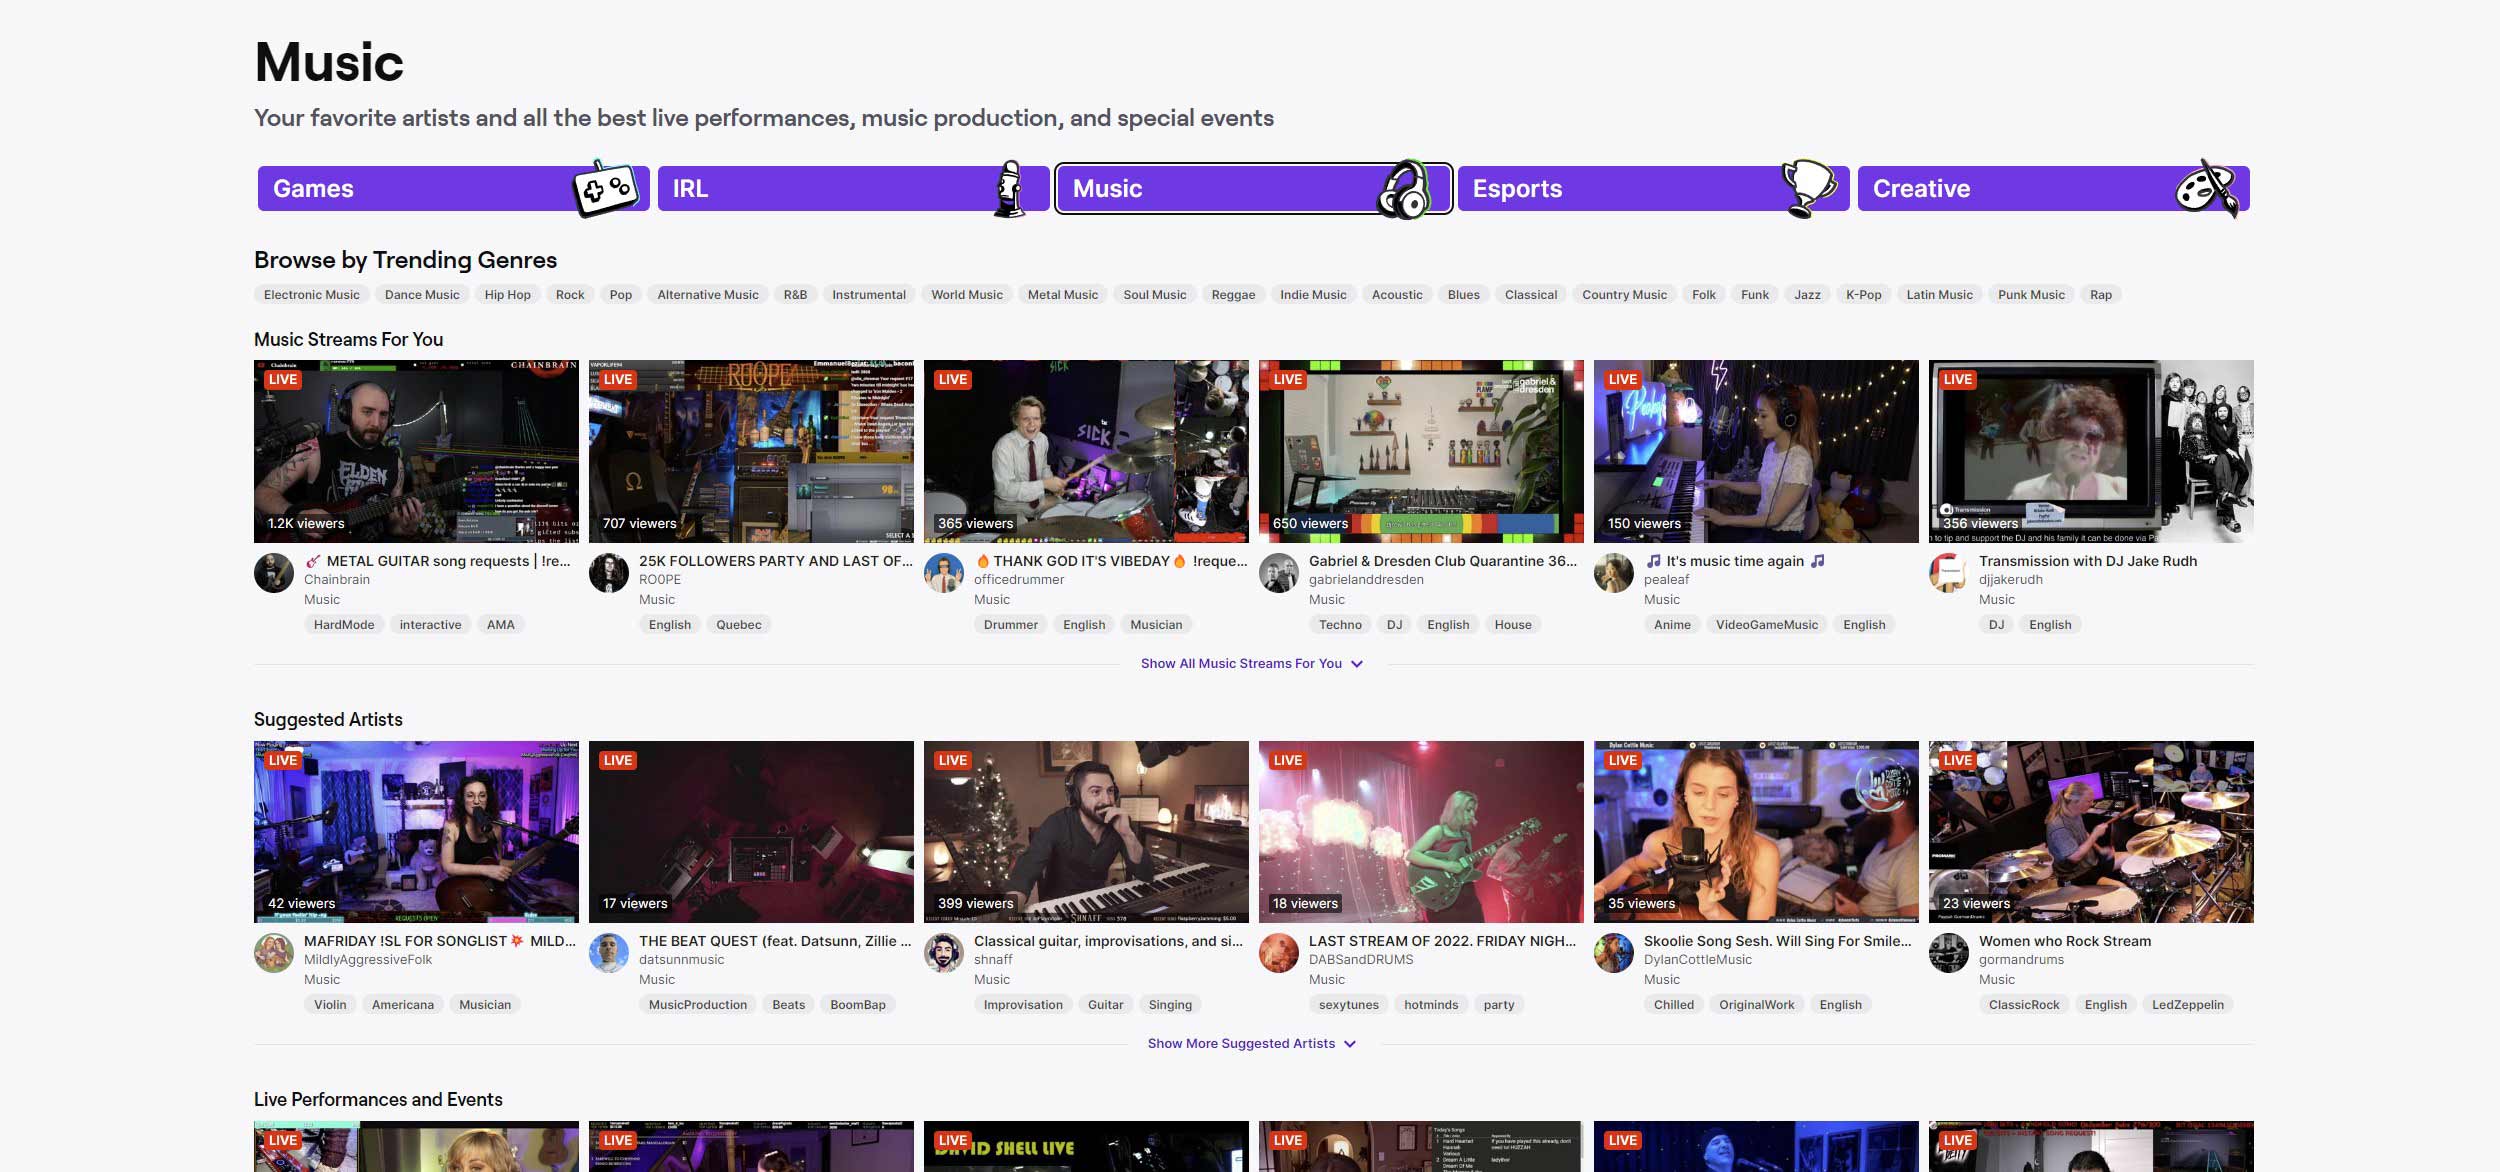 Music section on Twitch